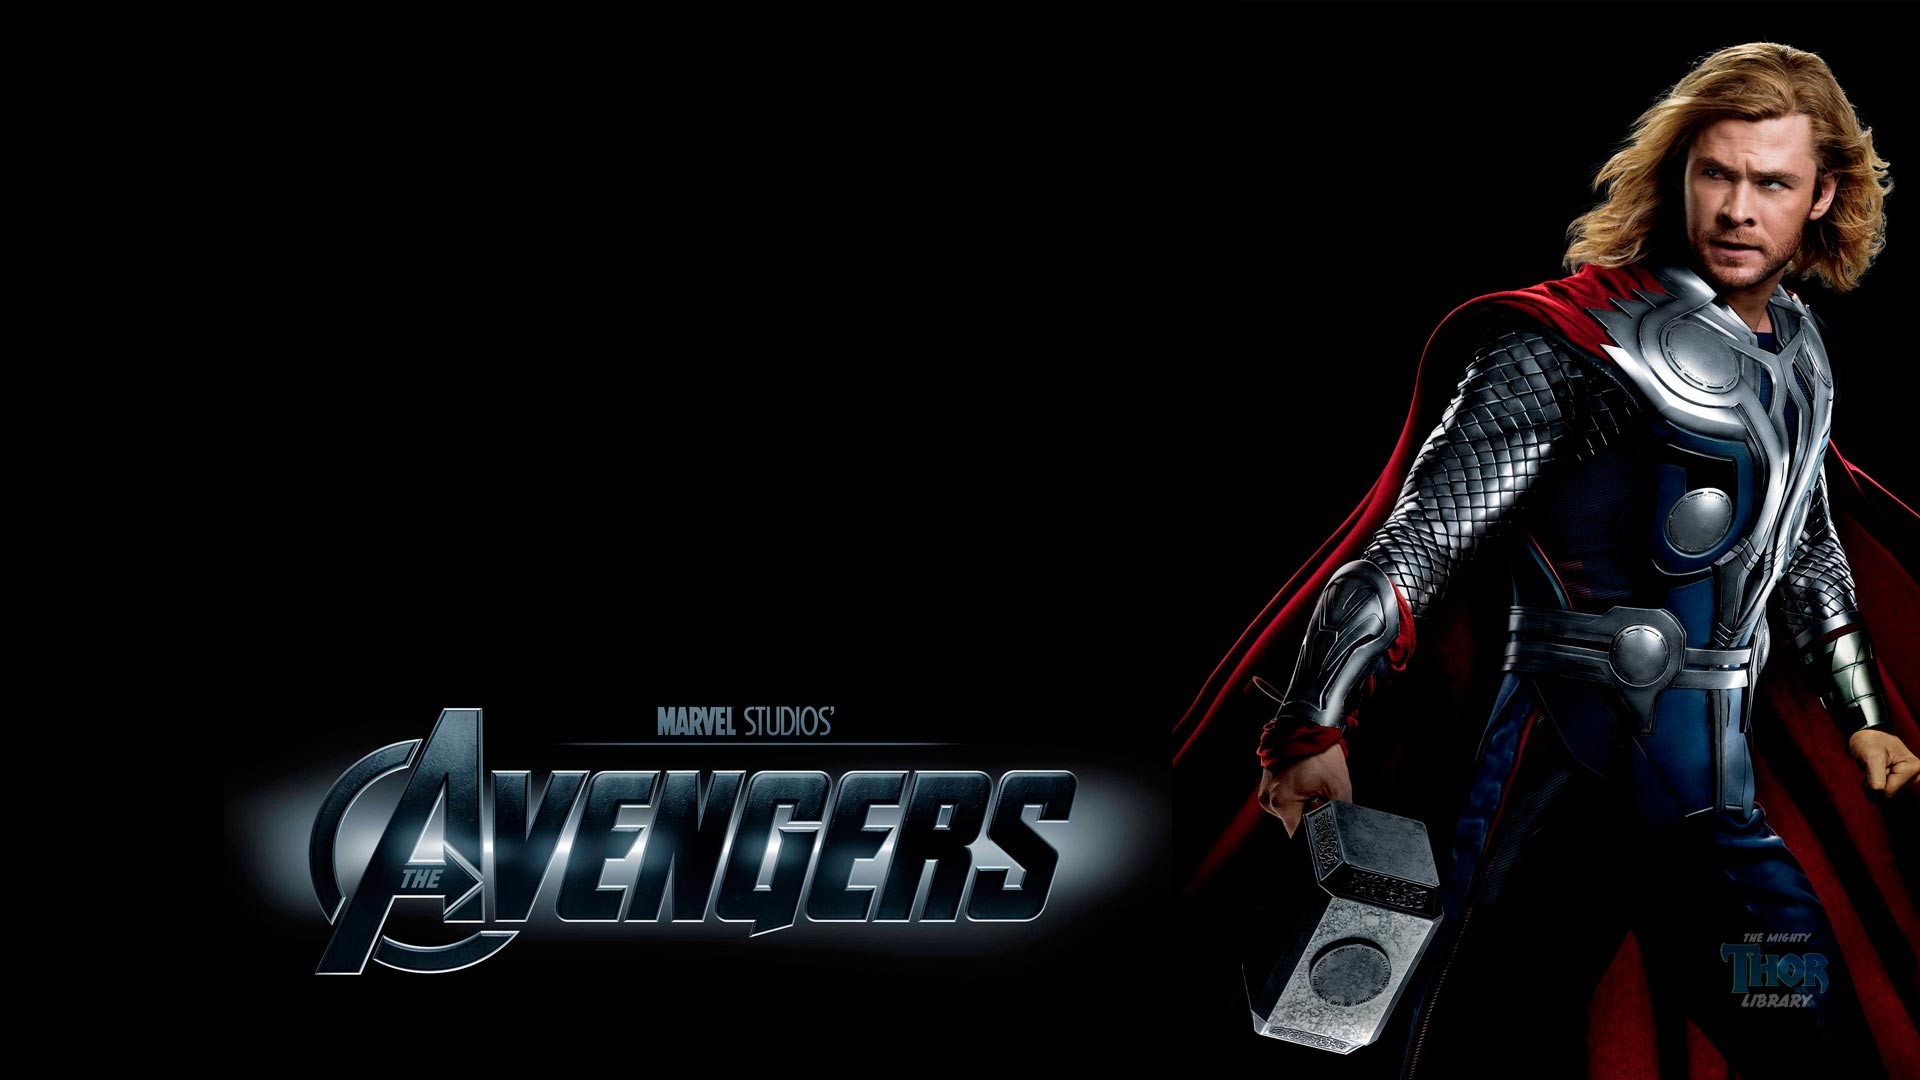 1920x1080 Related Wallpapers from Dexter. Thor Wallpaper